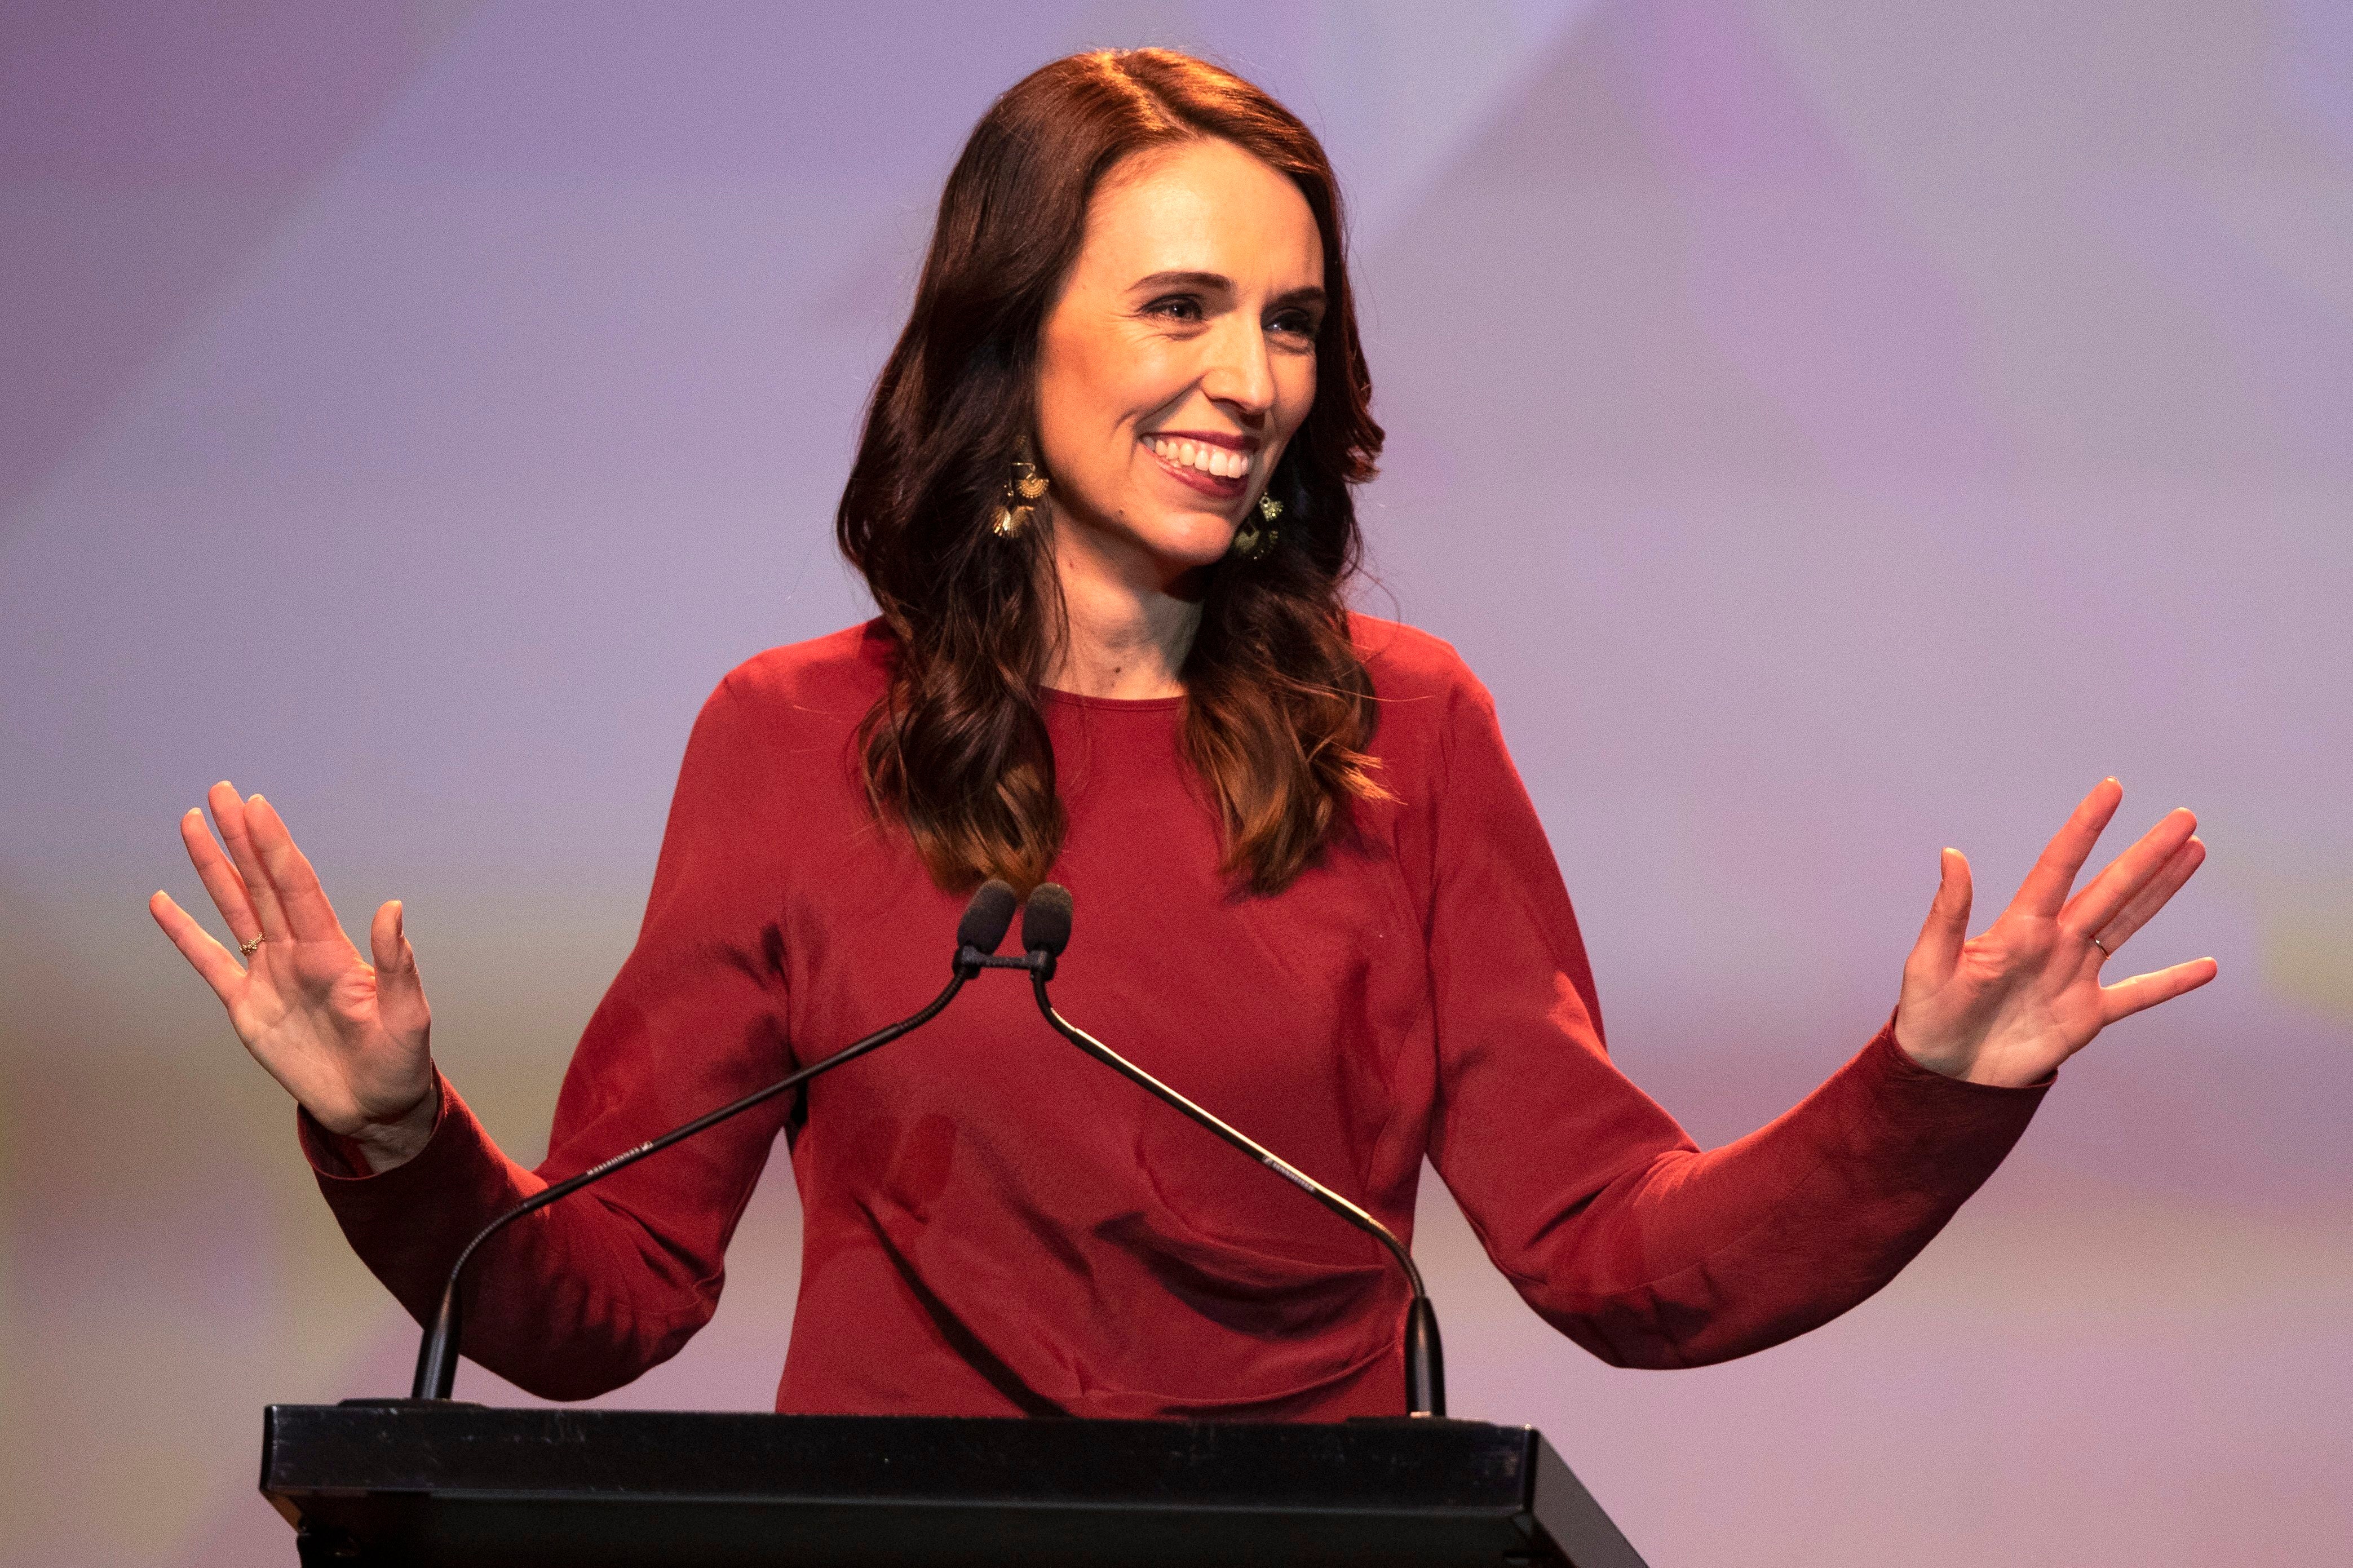 New Zealand is considering opening borders completely for people elsewhere in the world from October, PM Jacinda Ardern said